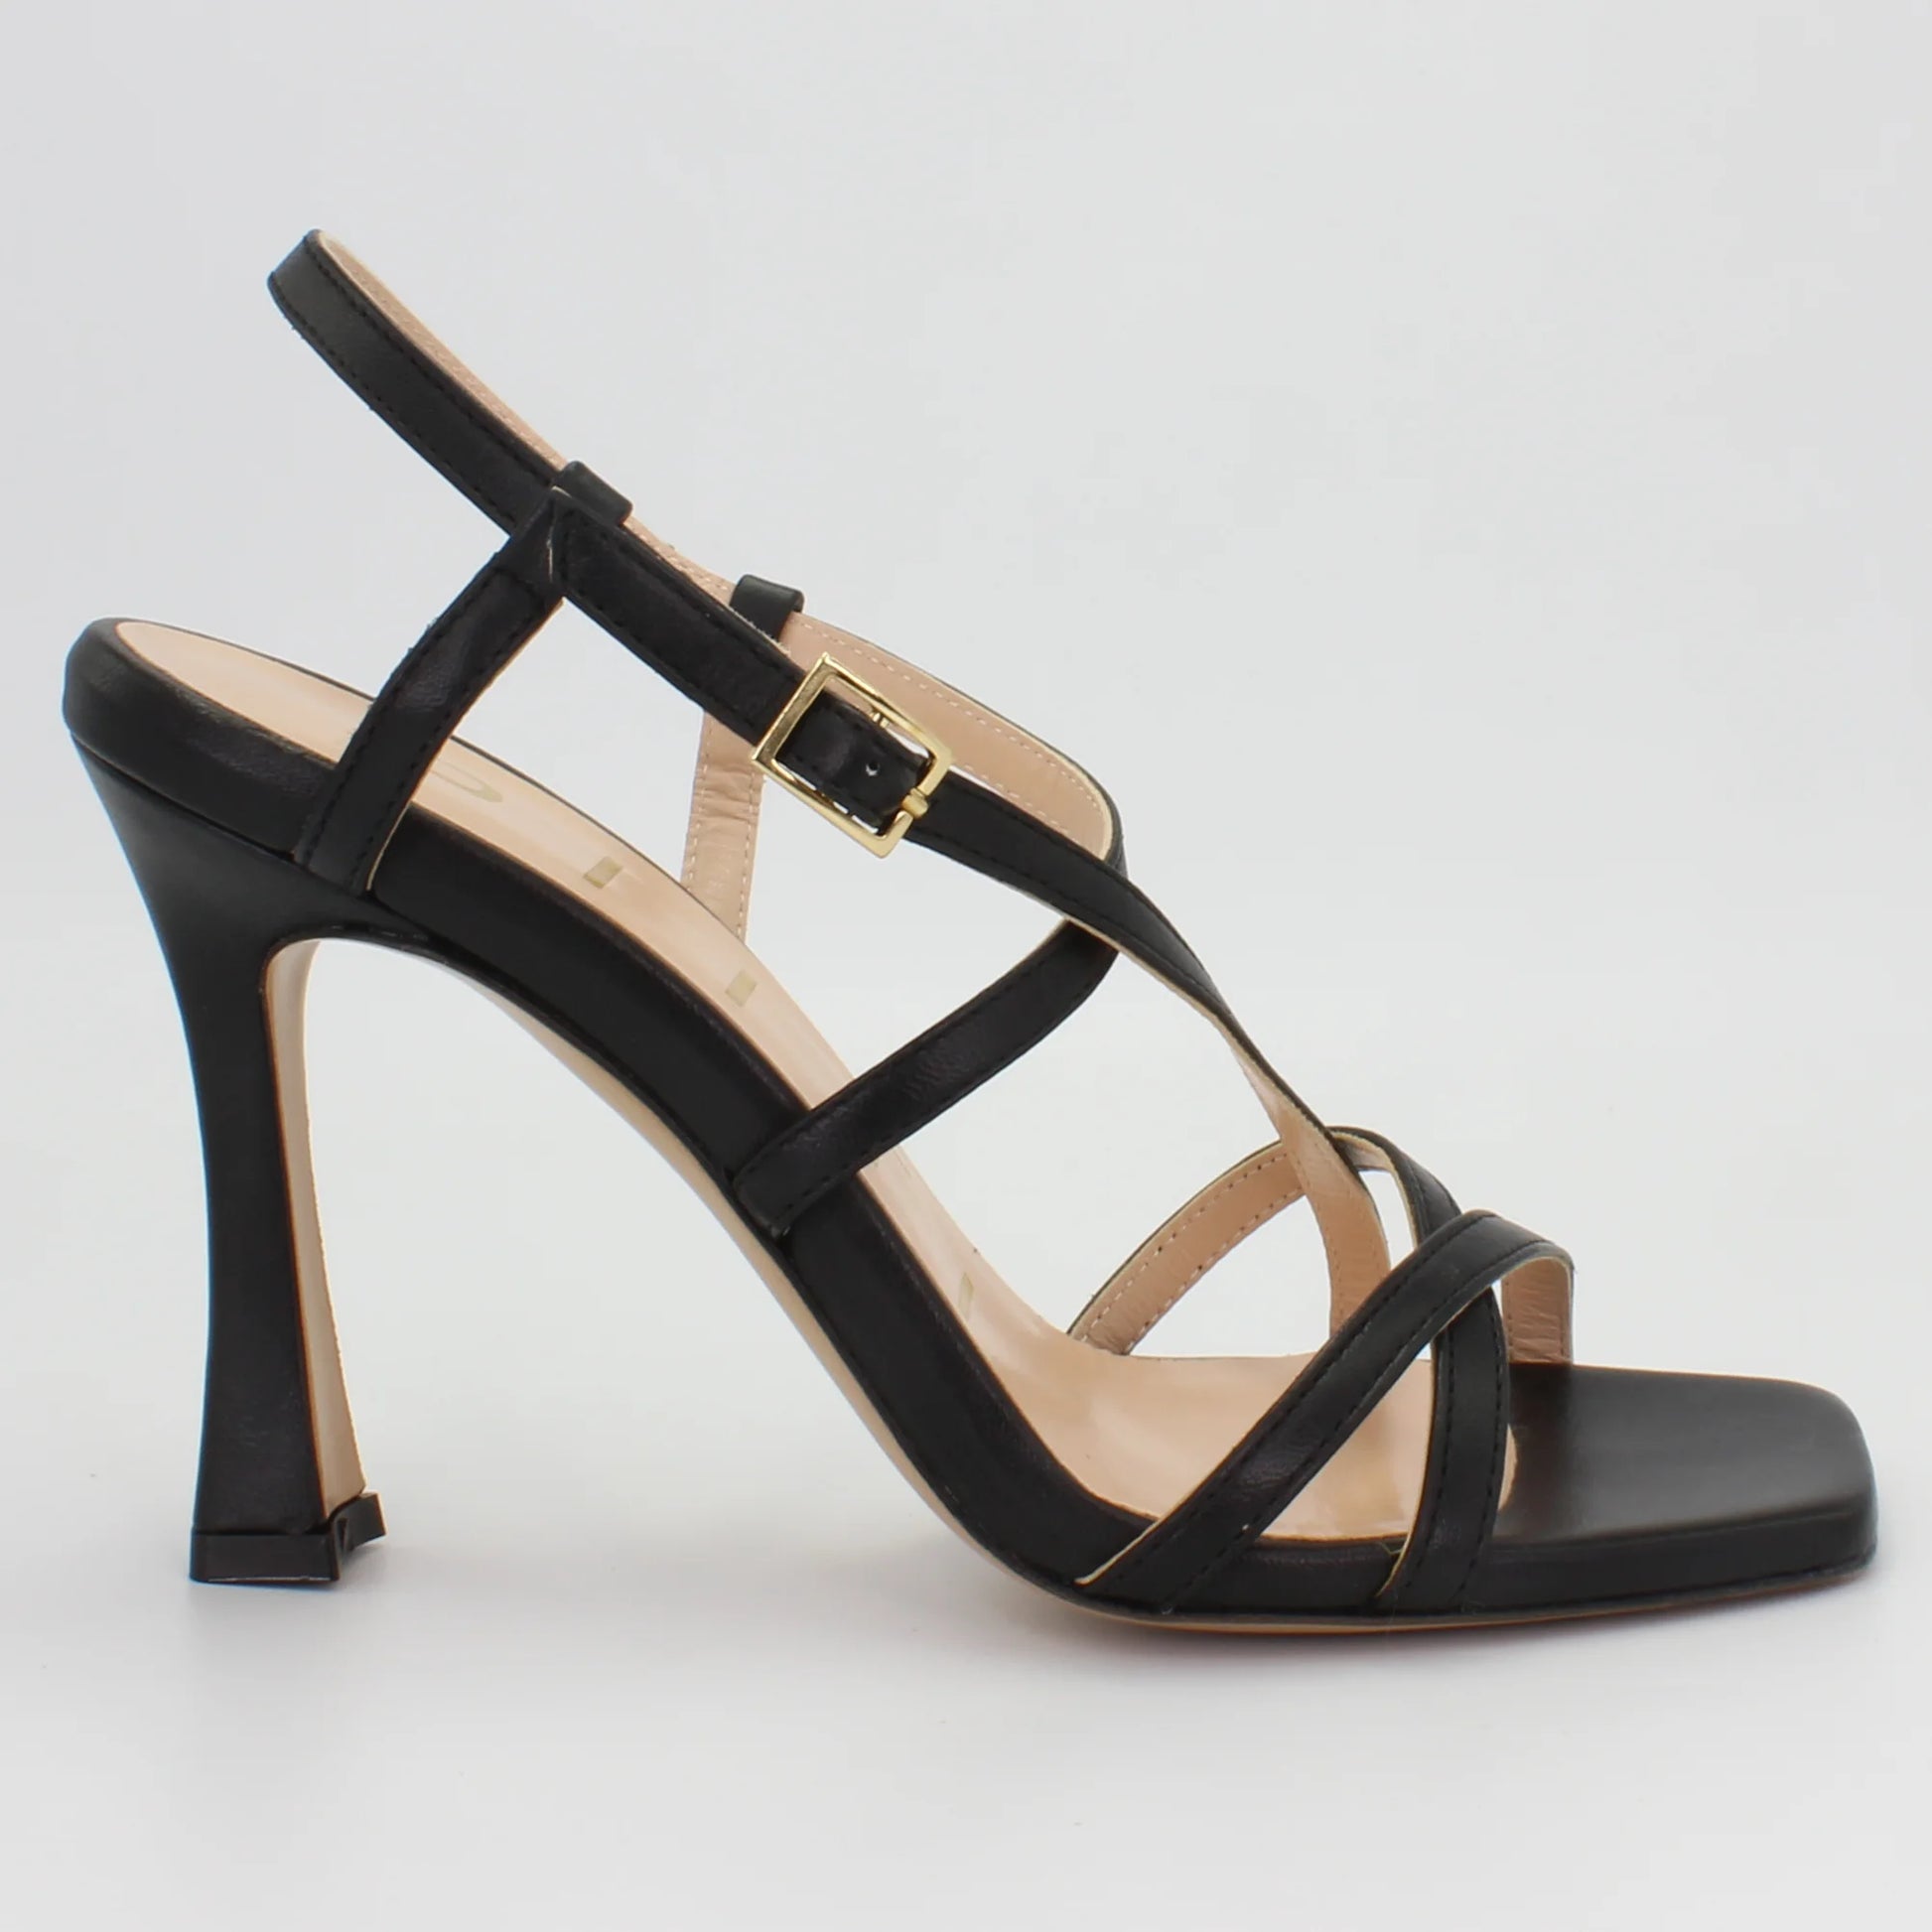 Shop Handmade Italian Leather High Heel in Nero (MP26102) or browse our range of hand-made Italian shoes for women in leather or suede in-store at Aliverti Cape Town, or shop online. We deliver in South Africa & offer multiple payment plans as well as accept multiple safe & secure payment methods.